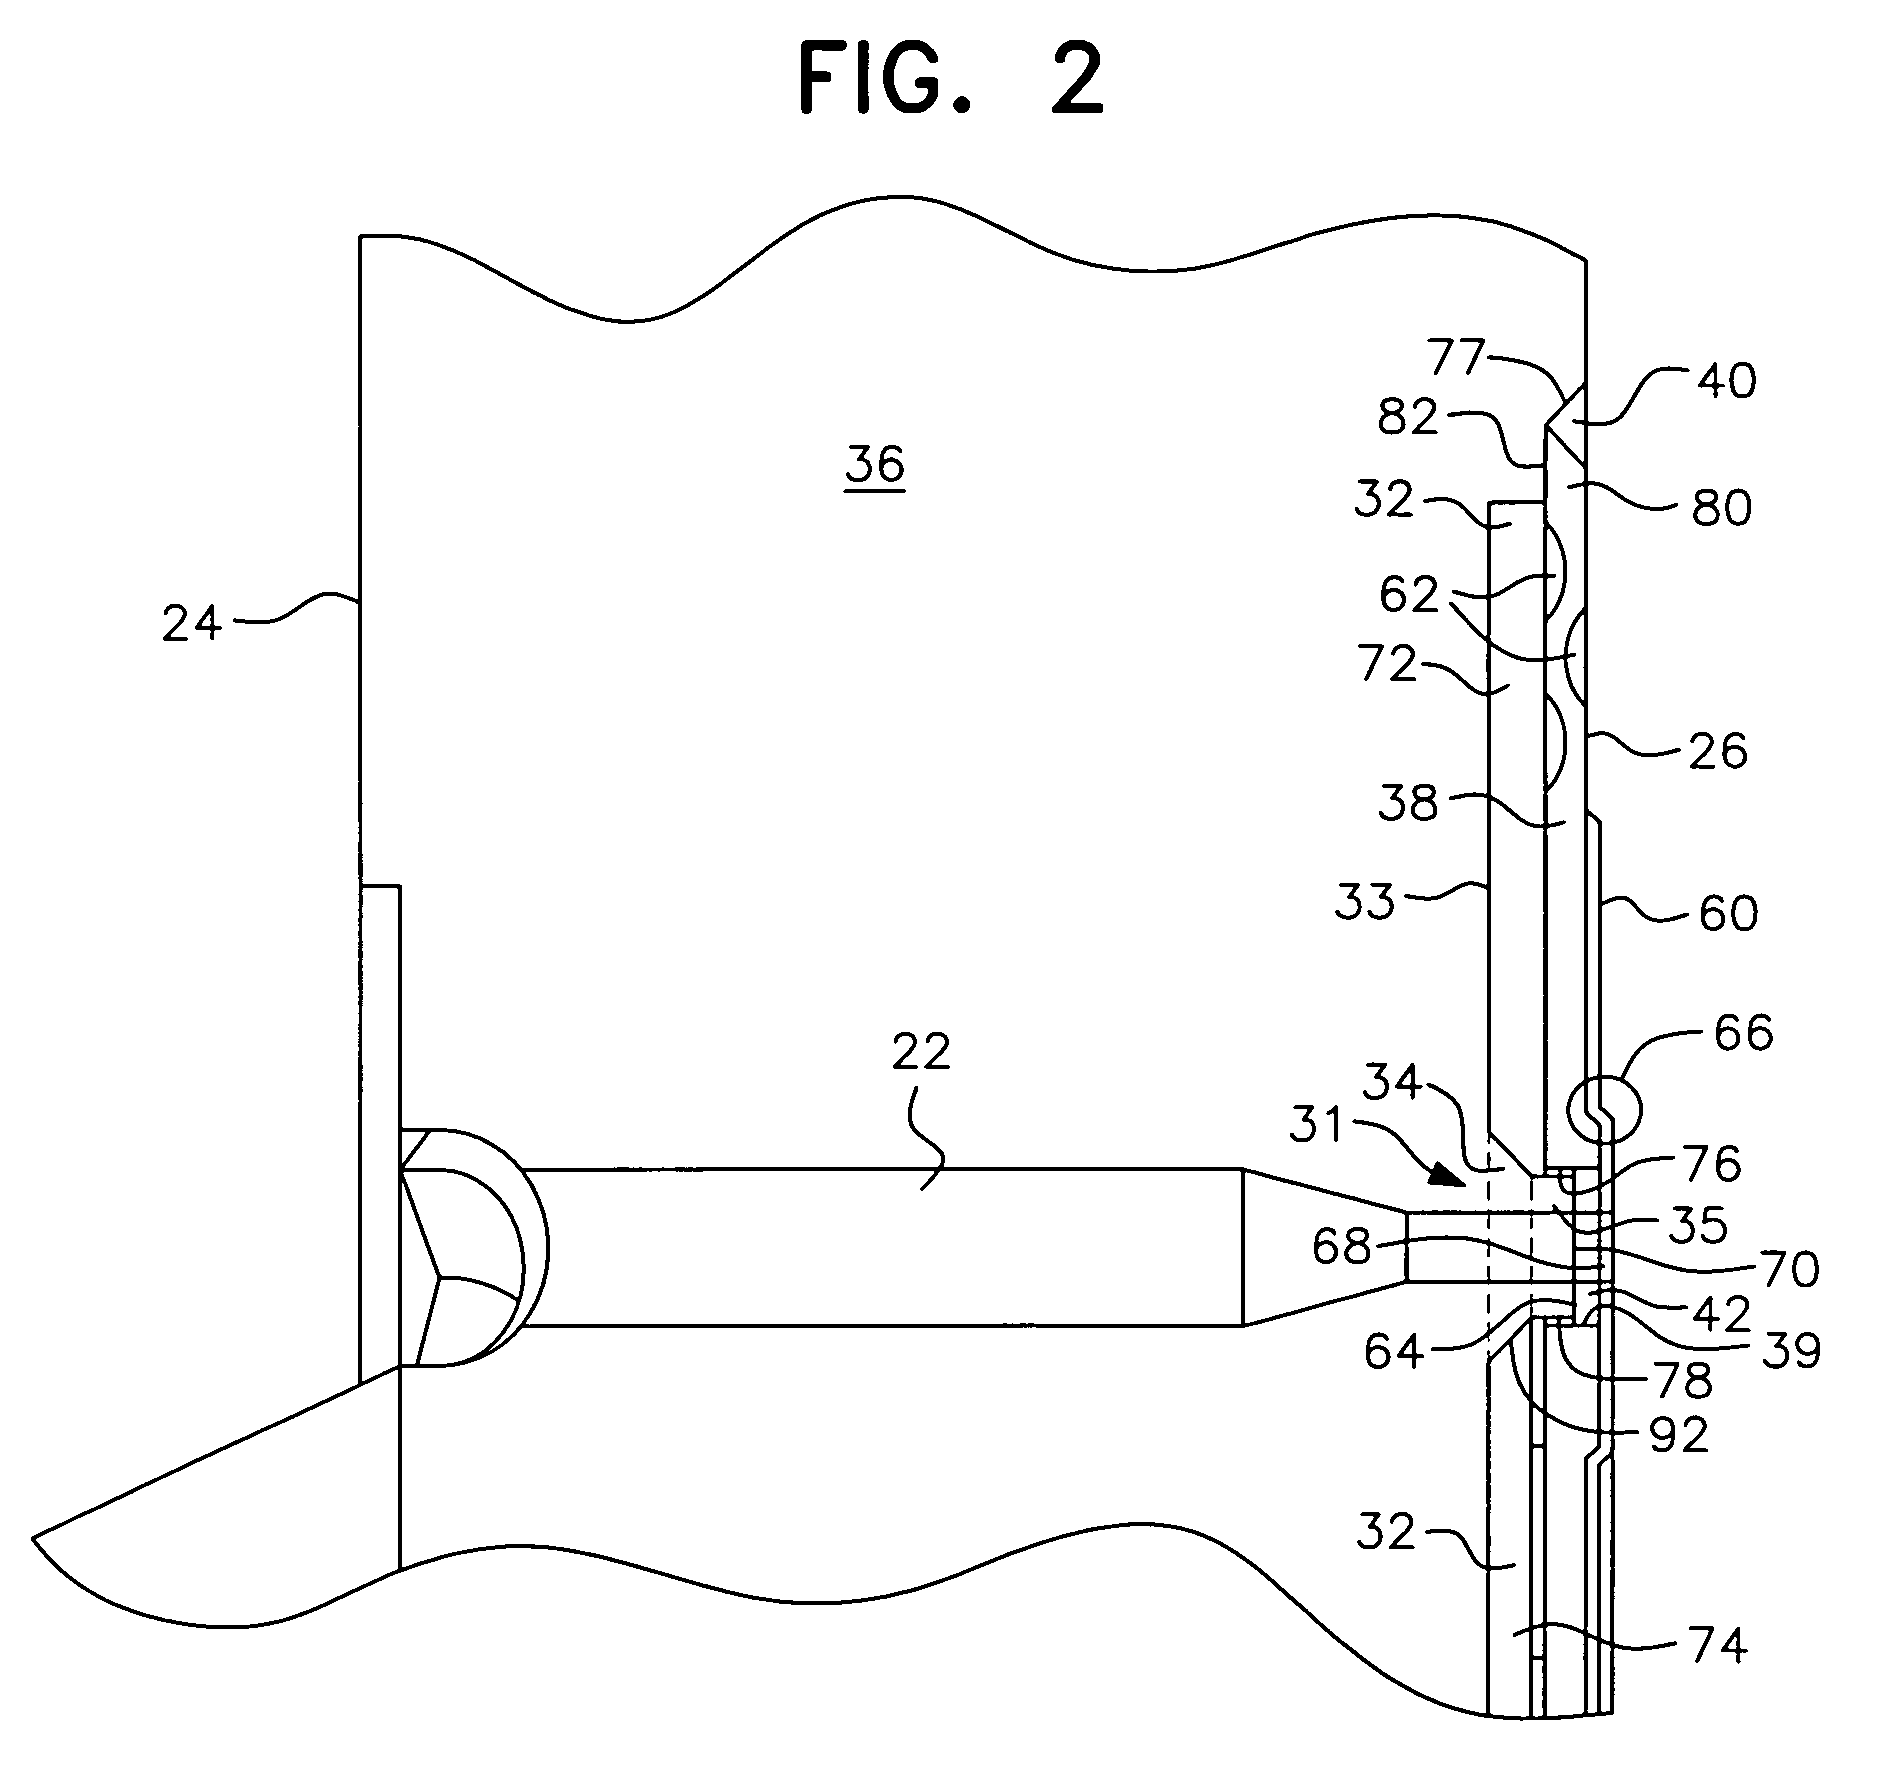 Thermally insulated die plate assembly for underwater pelletizing and the like